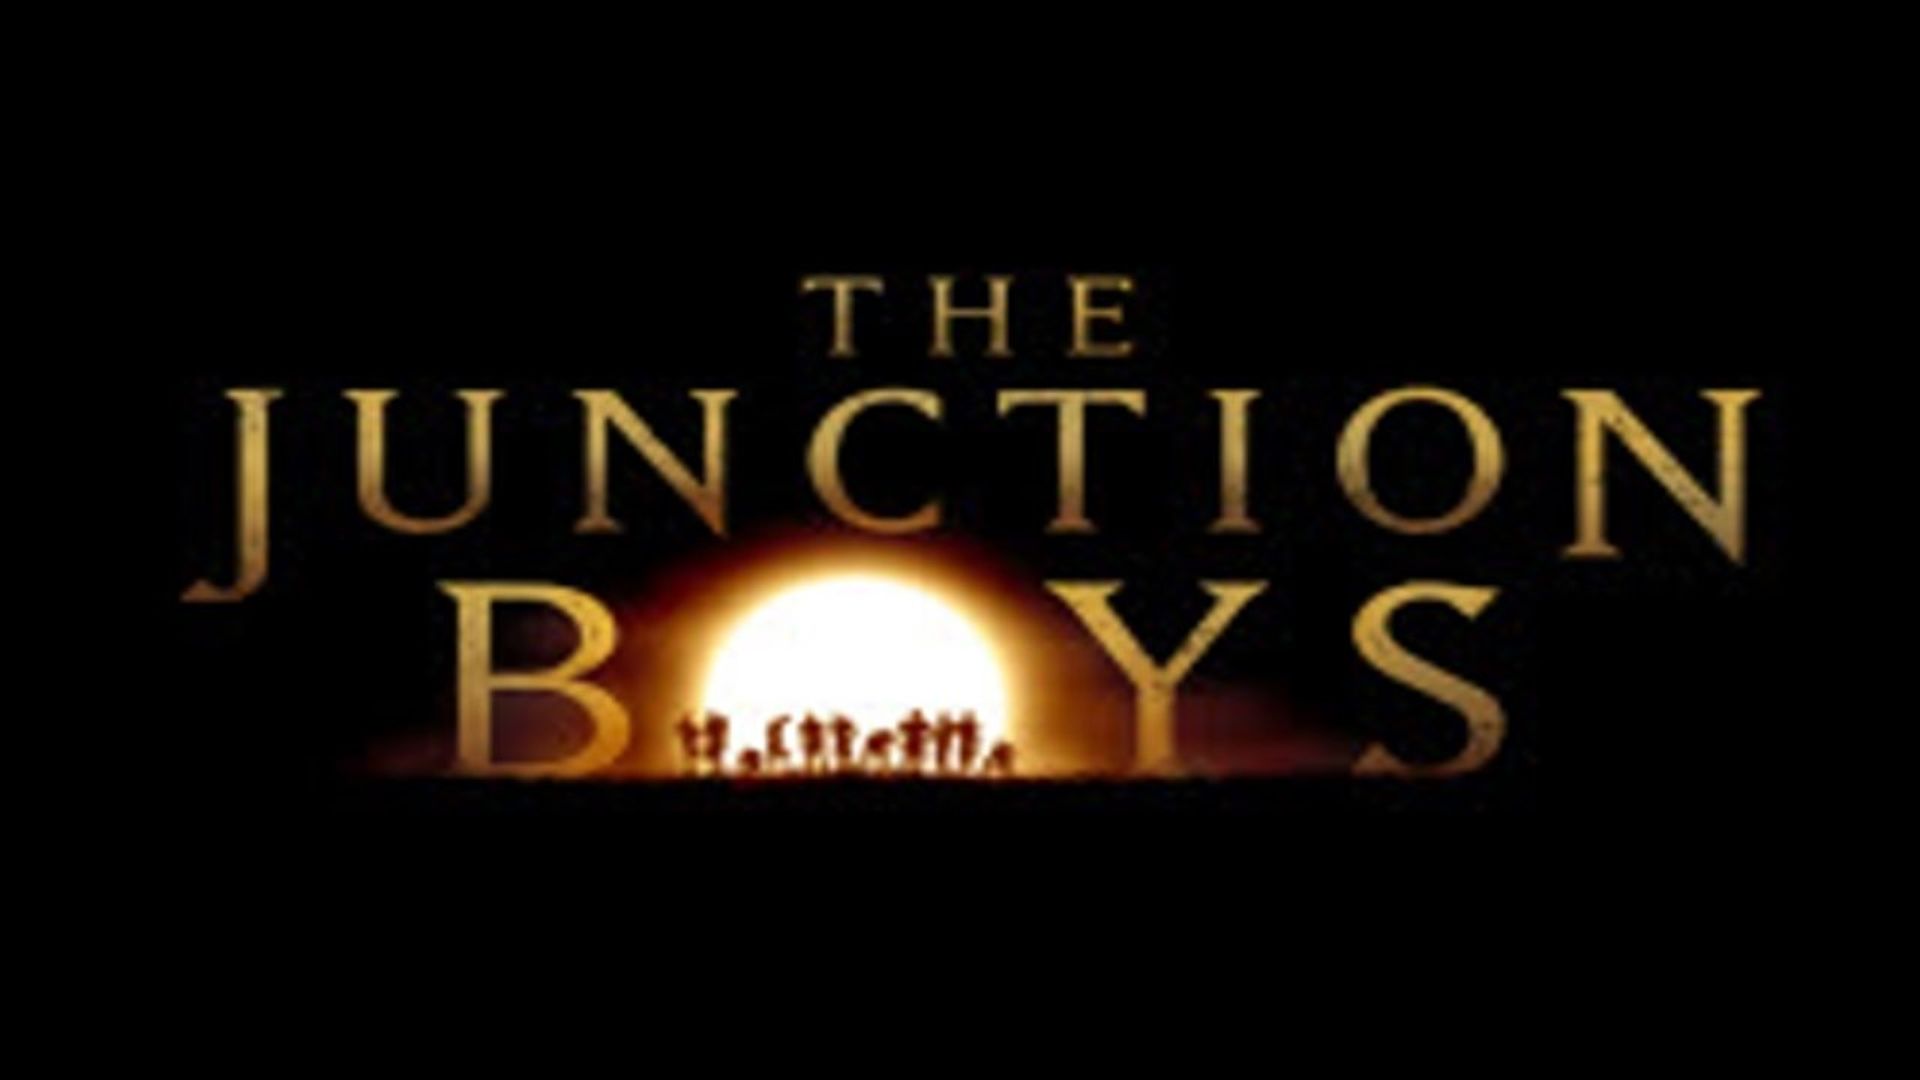 The Junction Boys Backdrop